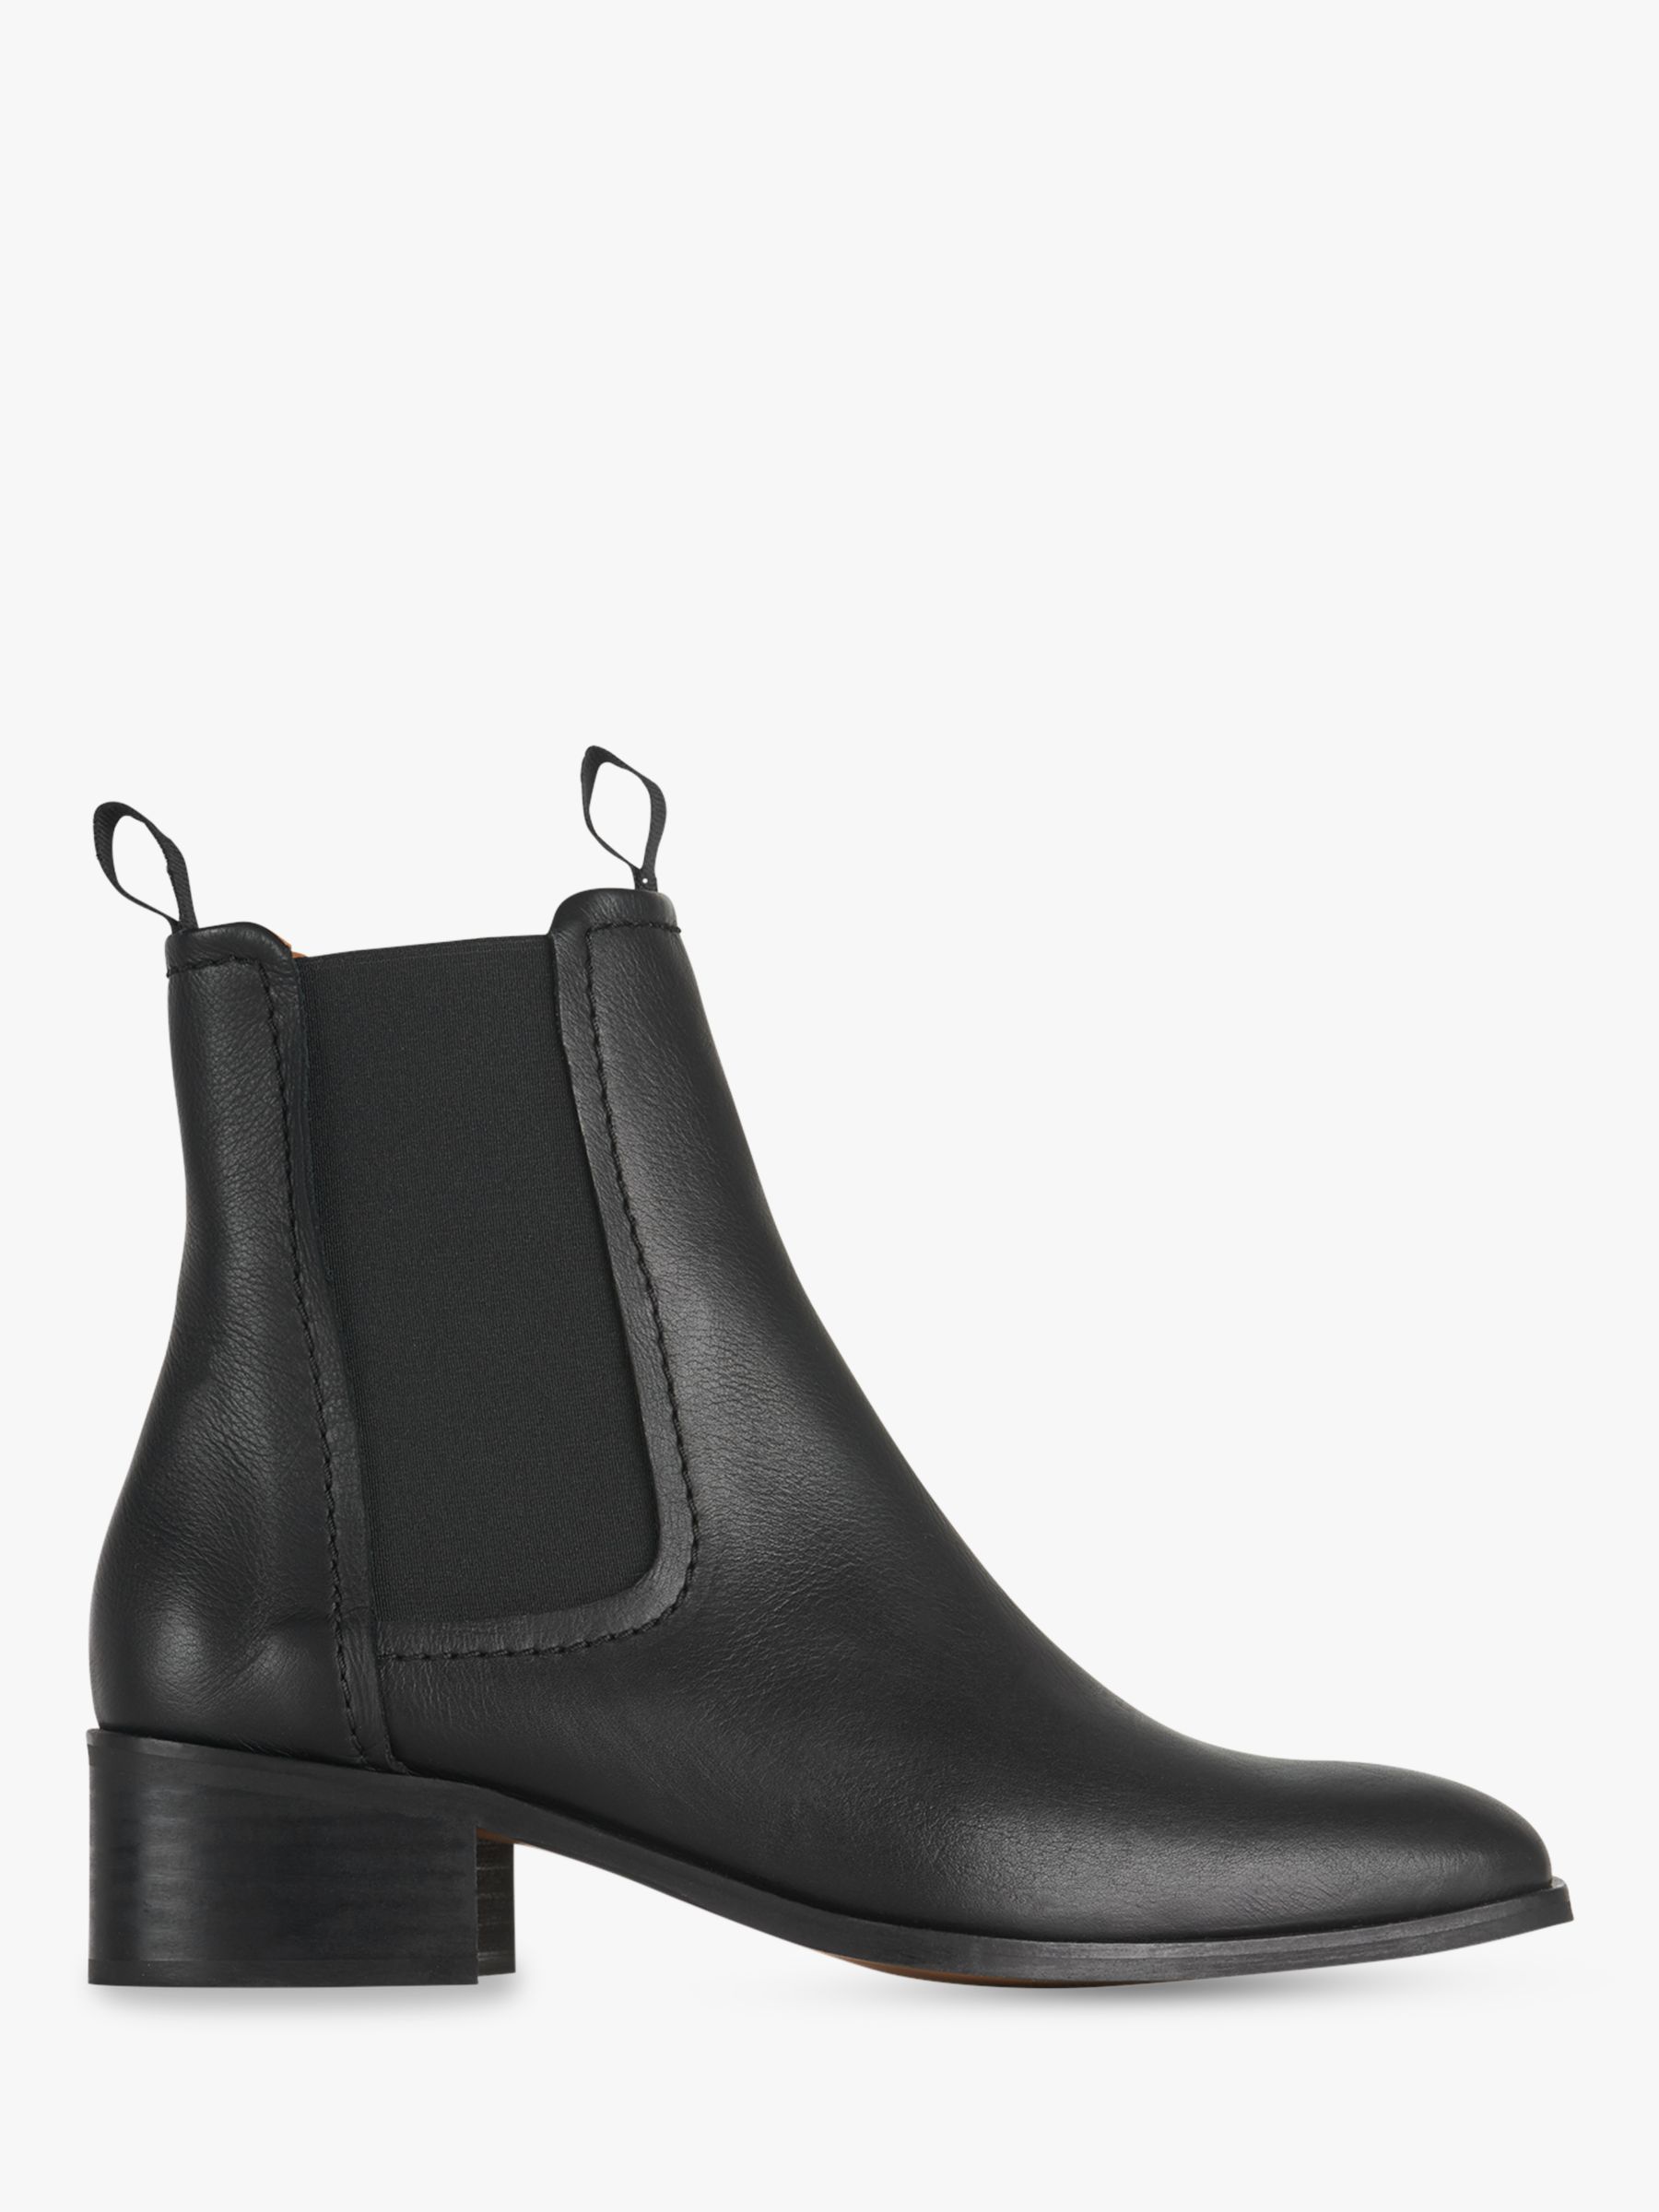 Whistles Fernbrook Leather Ankle Boots, Black at John Lewis & Partners